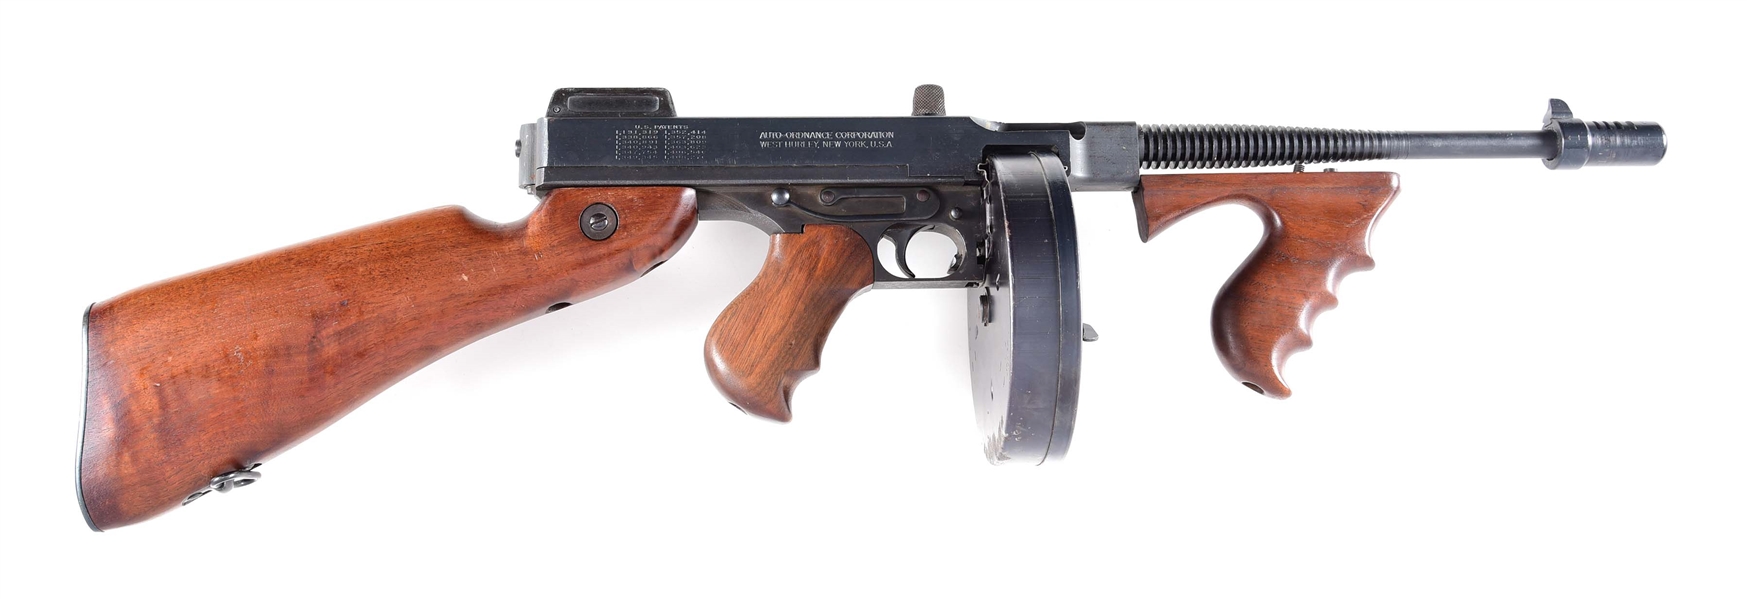 (N) WEST HURLEY THOMPSON SEMI-AUTOMATIC CARBINE WITH HARD CASE (SHORT BARRELED RIFLE).